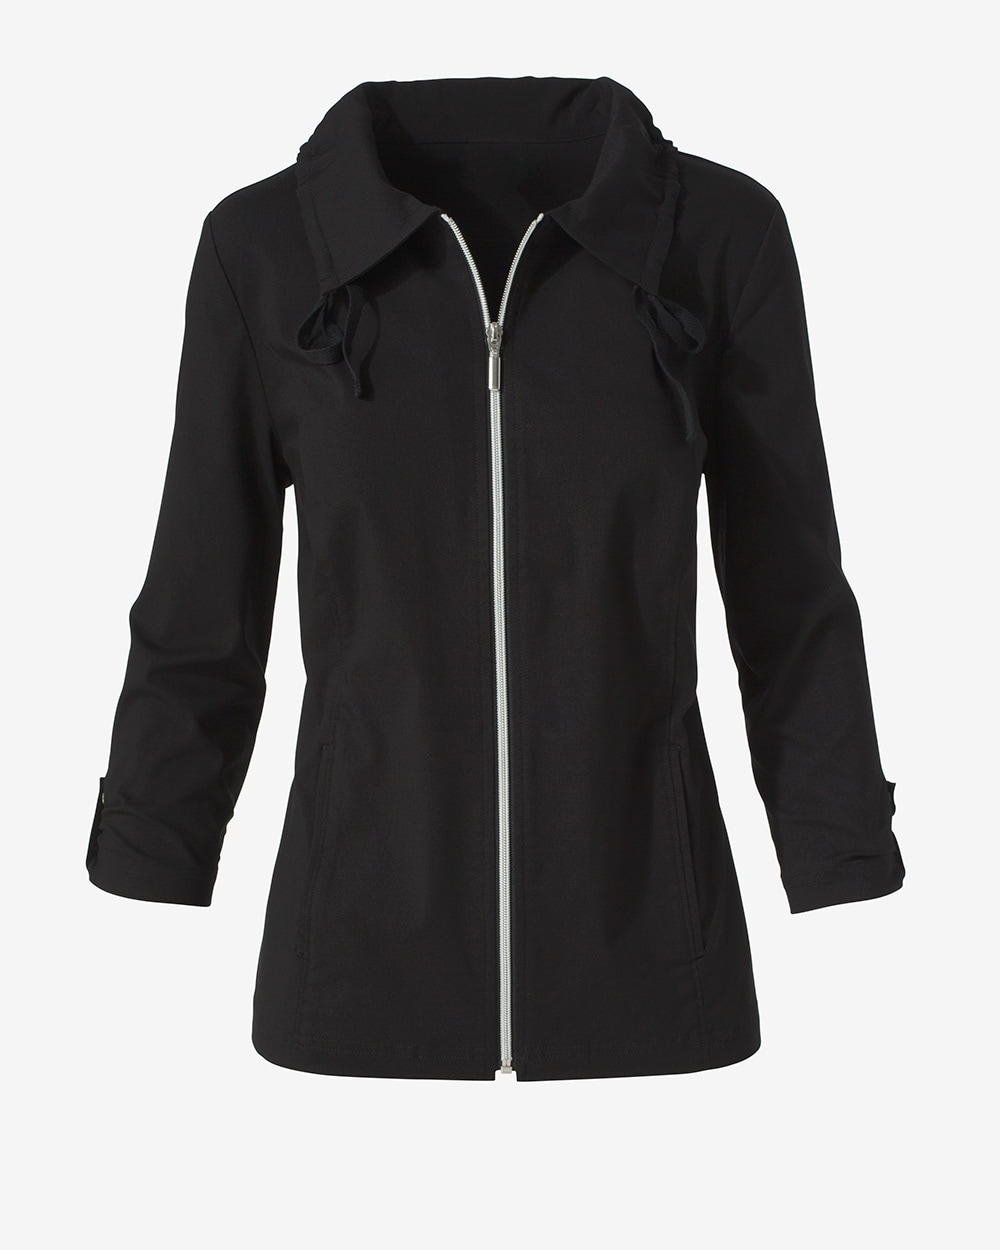 Weekends Perfect Stretch Grommet Jacket